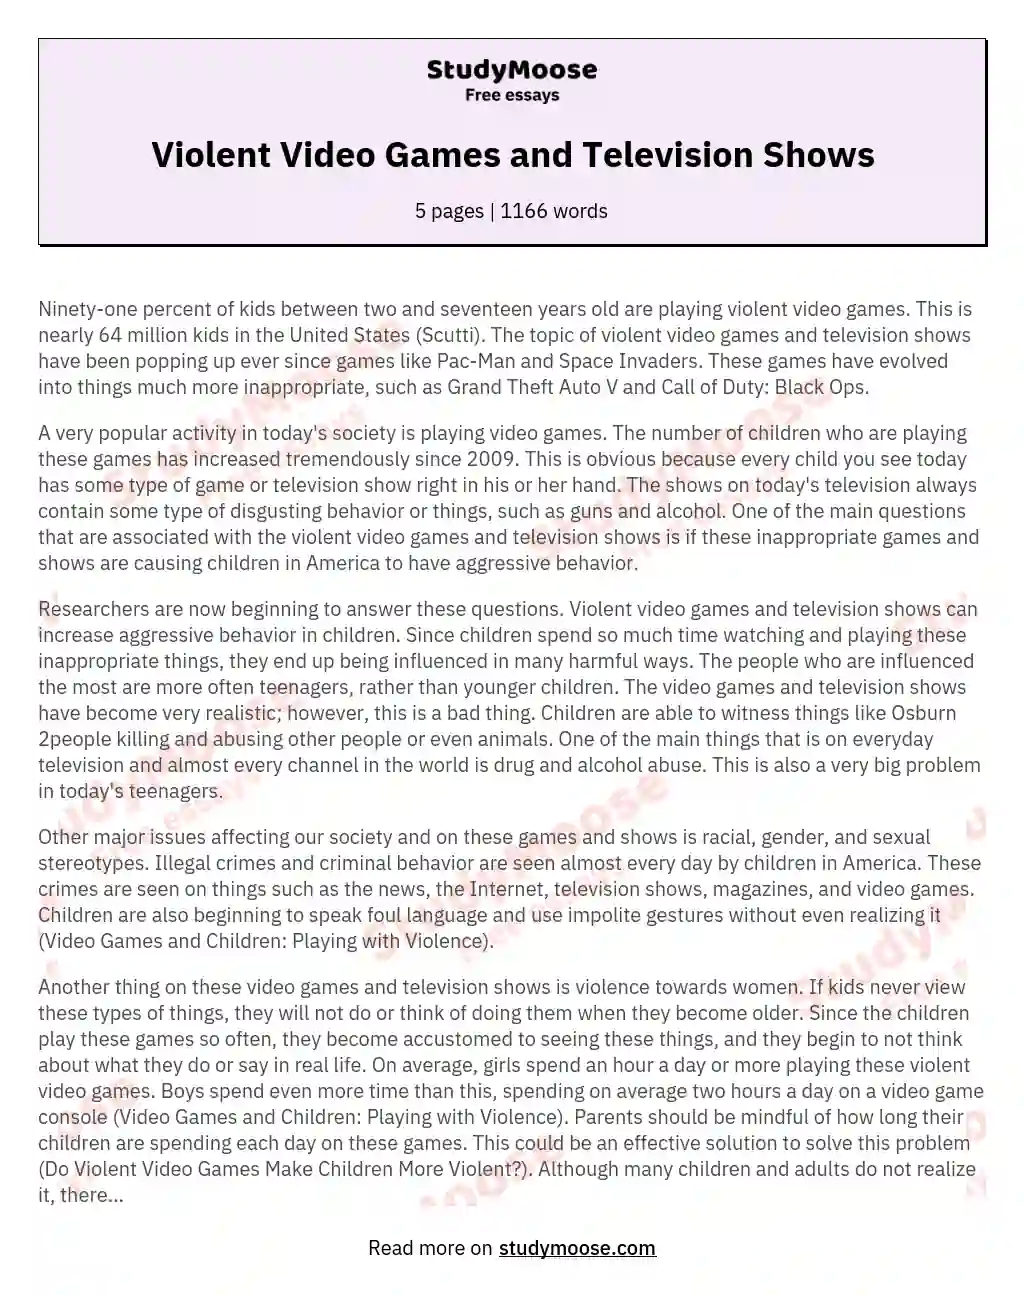 Violent Video Games and Television Shows essay